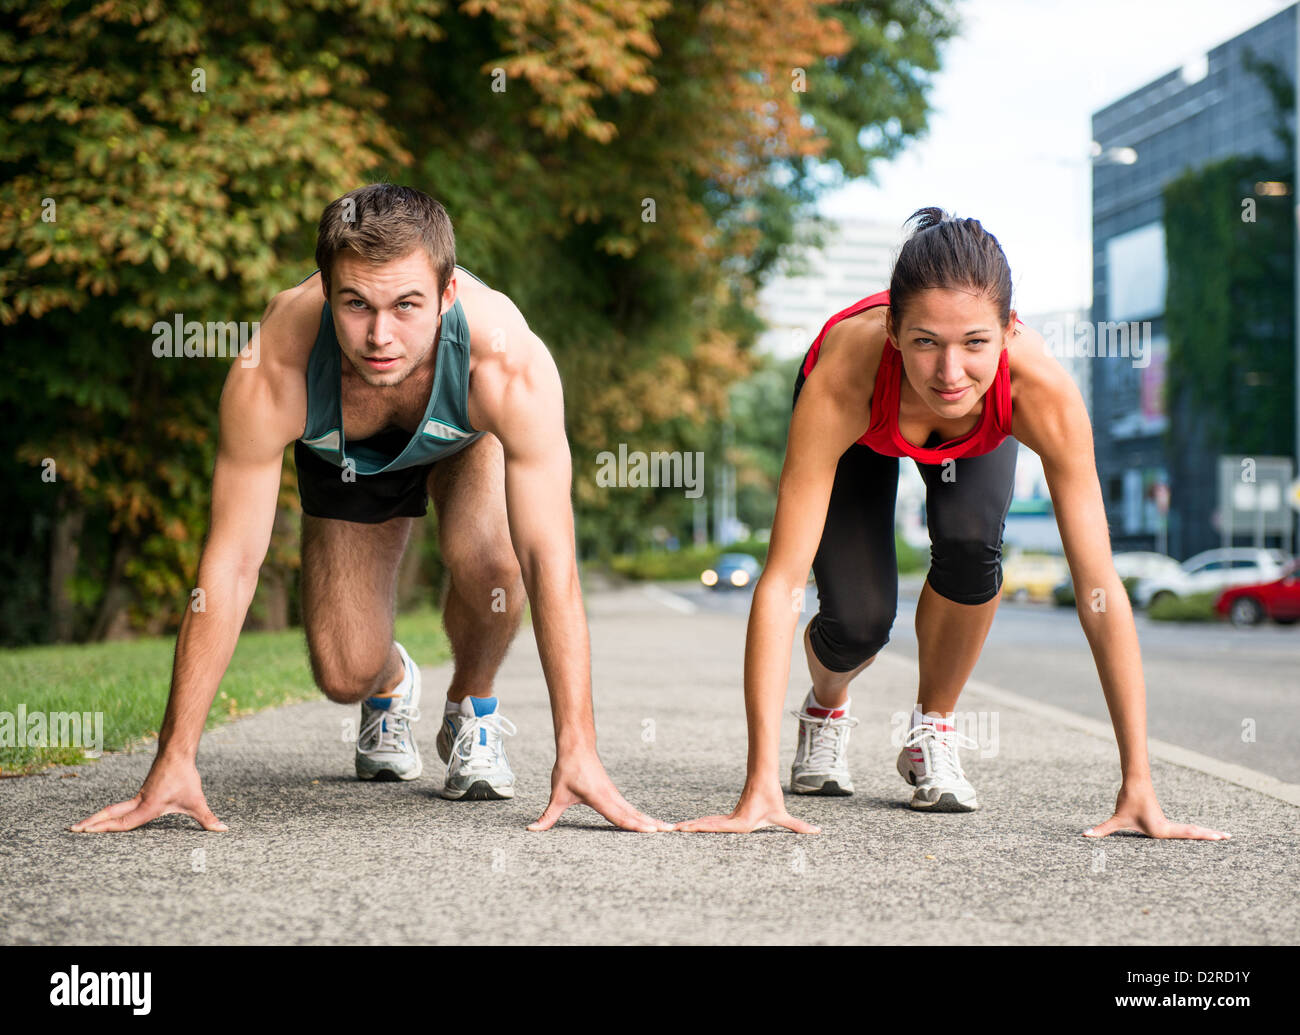 Young sport couple in starting postion prepared to compete and run Stock Photo